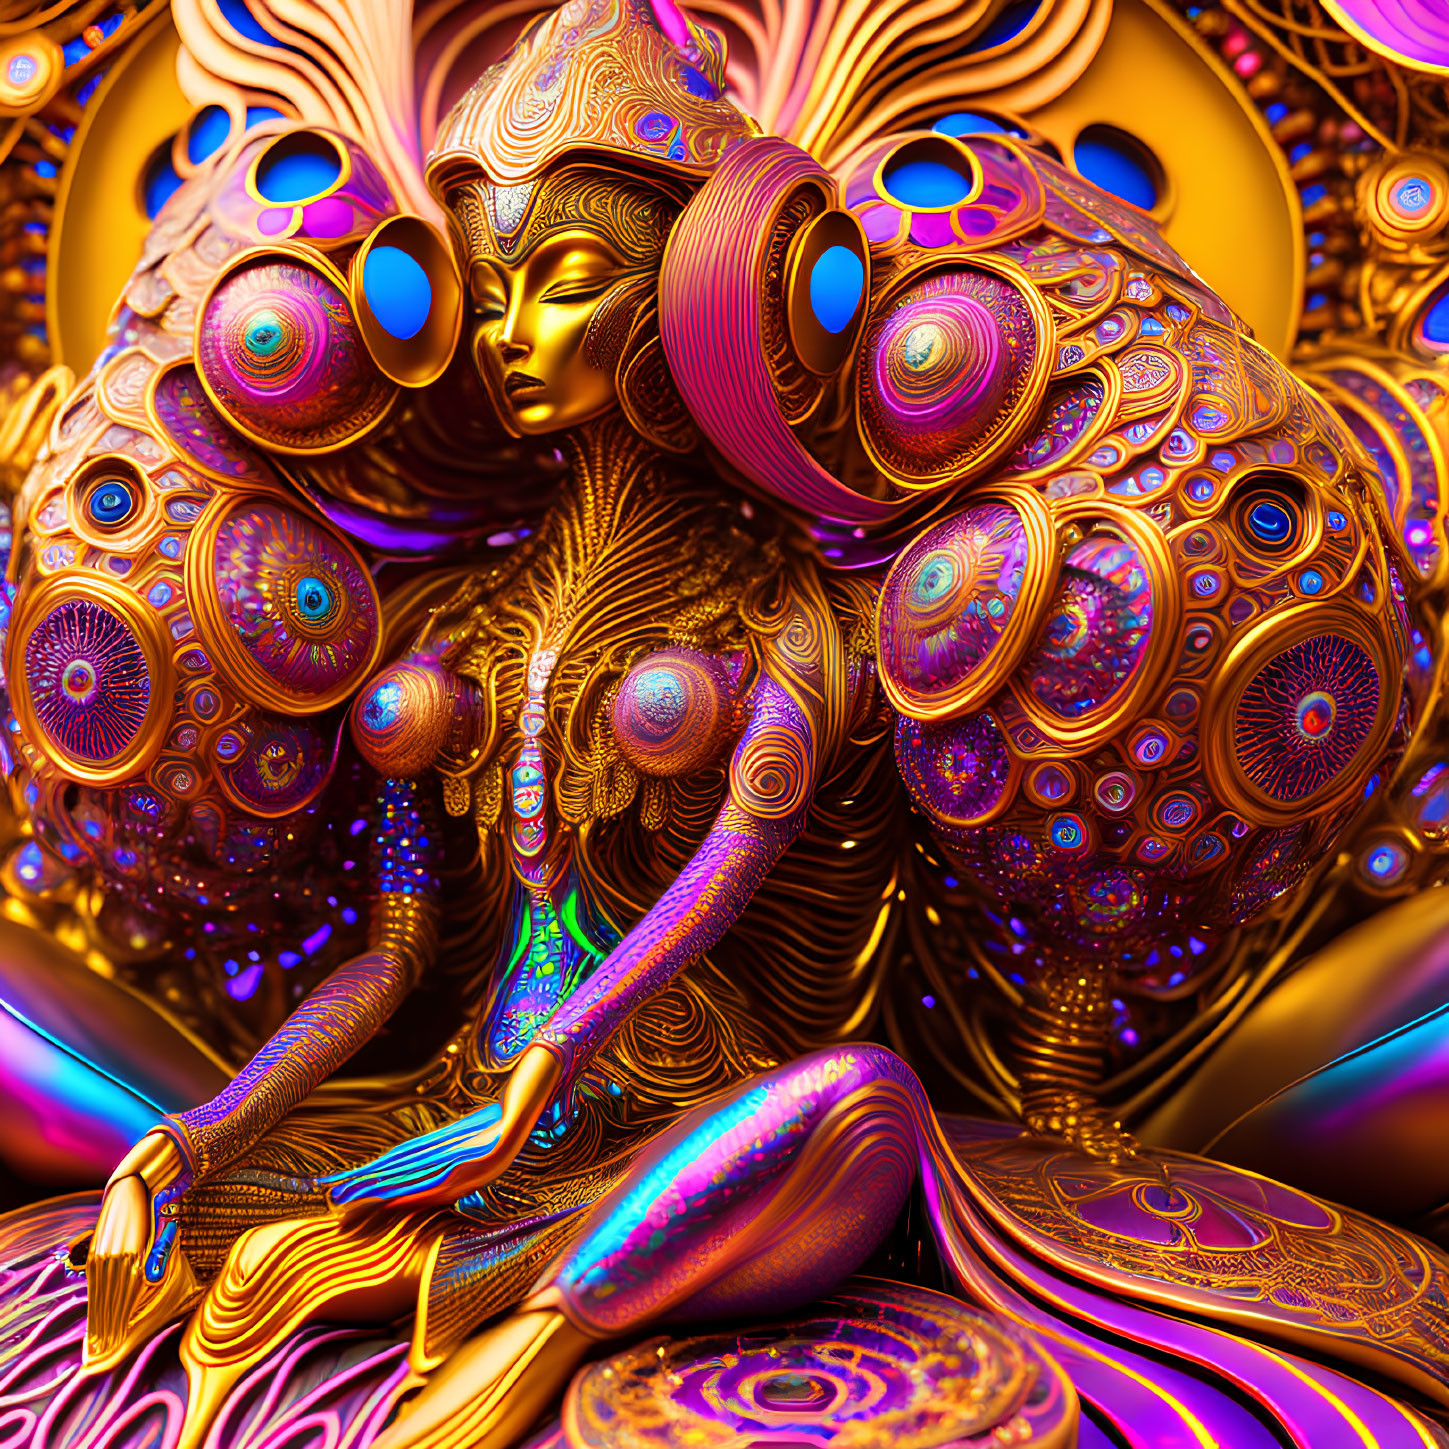 Colorful digital artwork: Golden humanoid with intricate patterns and peacock feather-like details in vibrant, textured